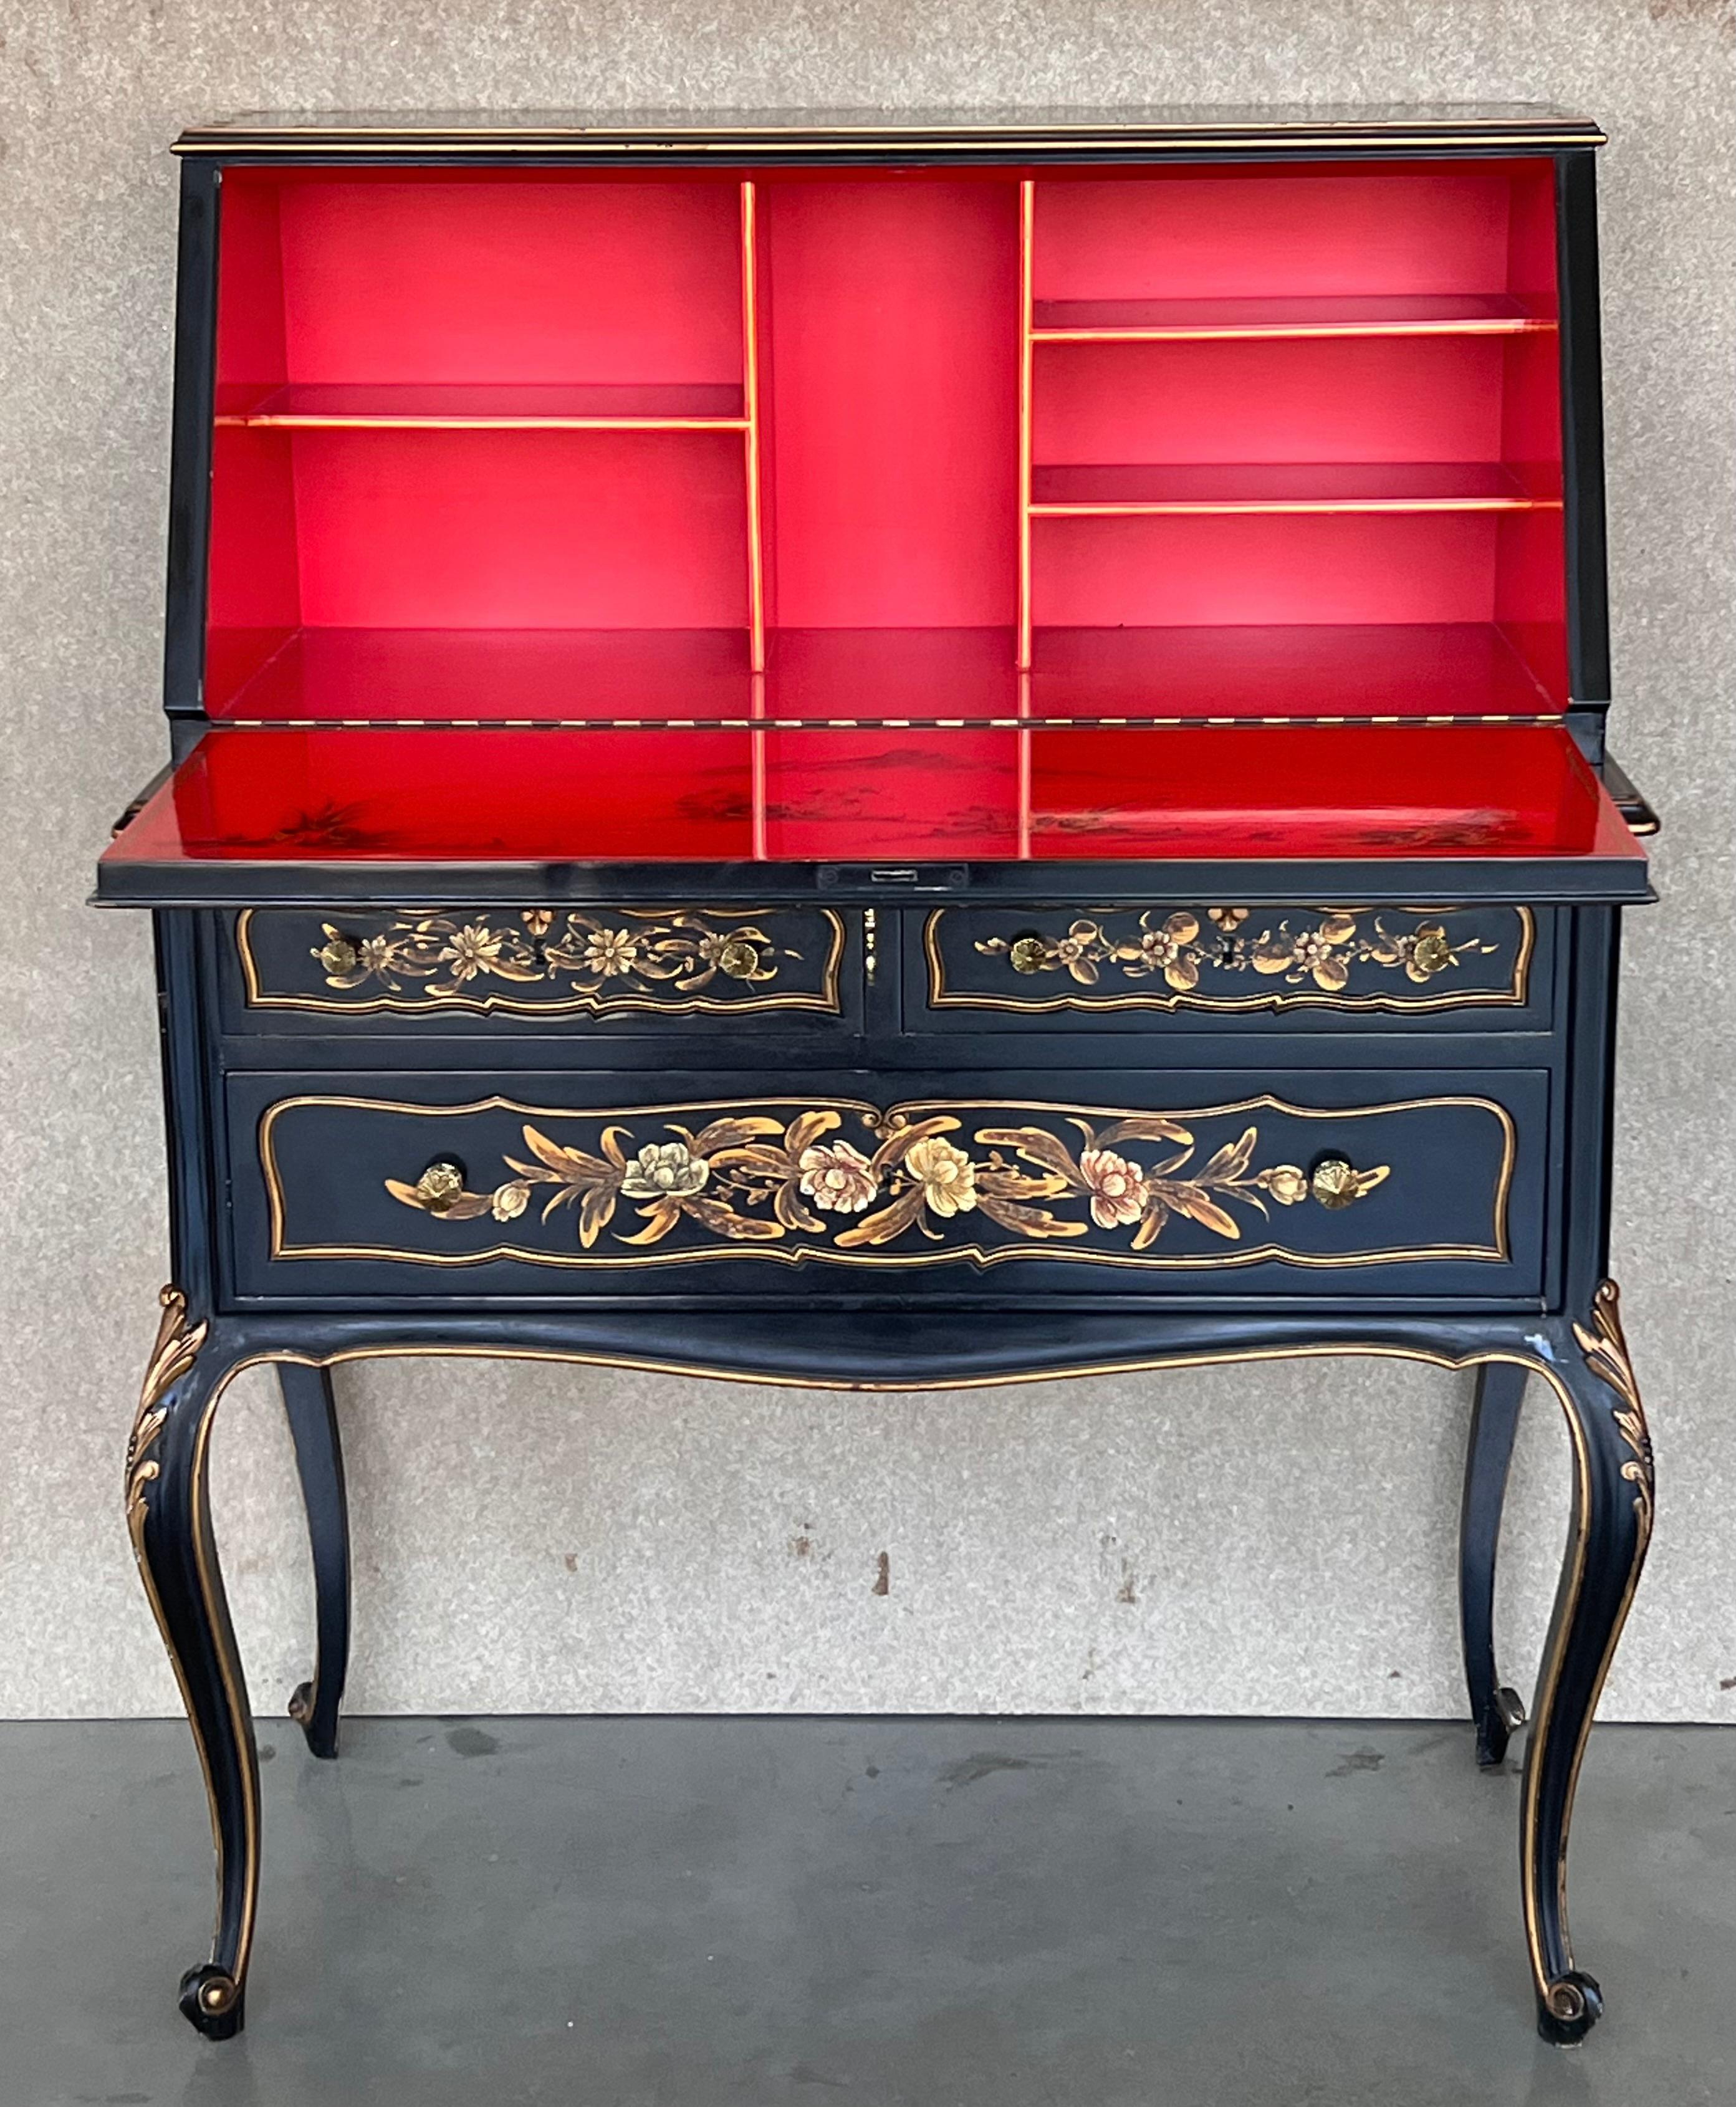 European Chippendale Style Slant Top Desk in Black Lacquered Wood, circa 1900 For Sale